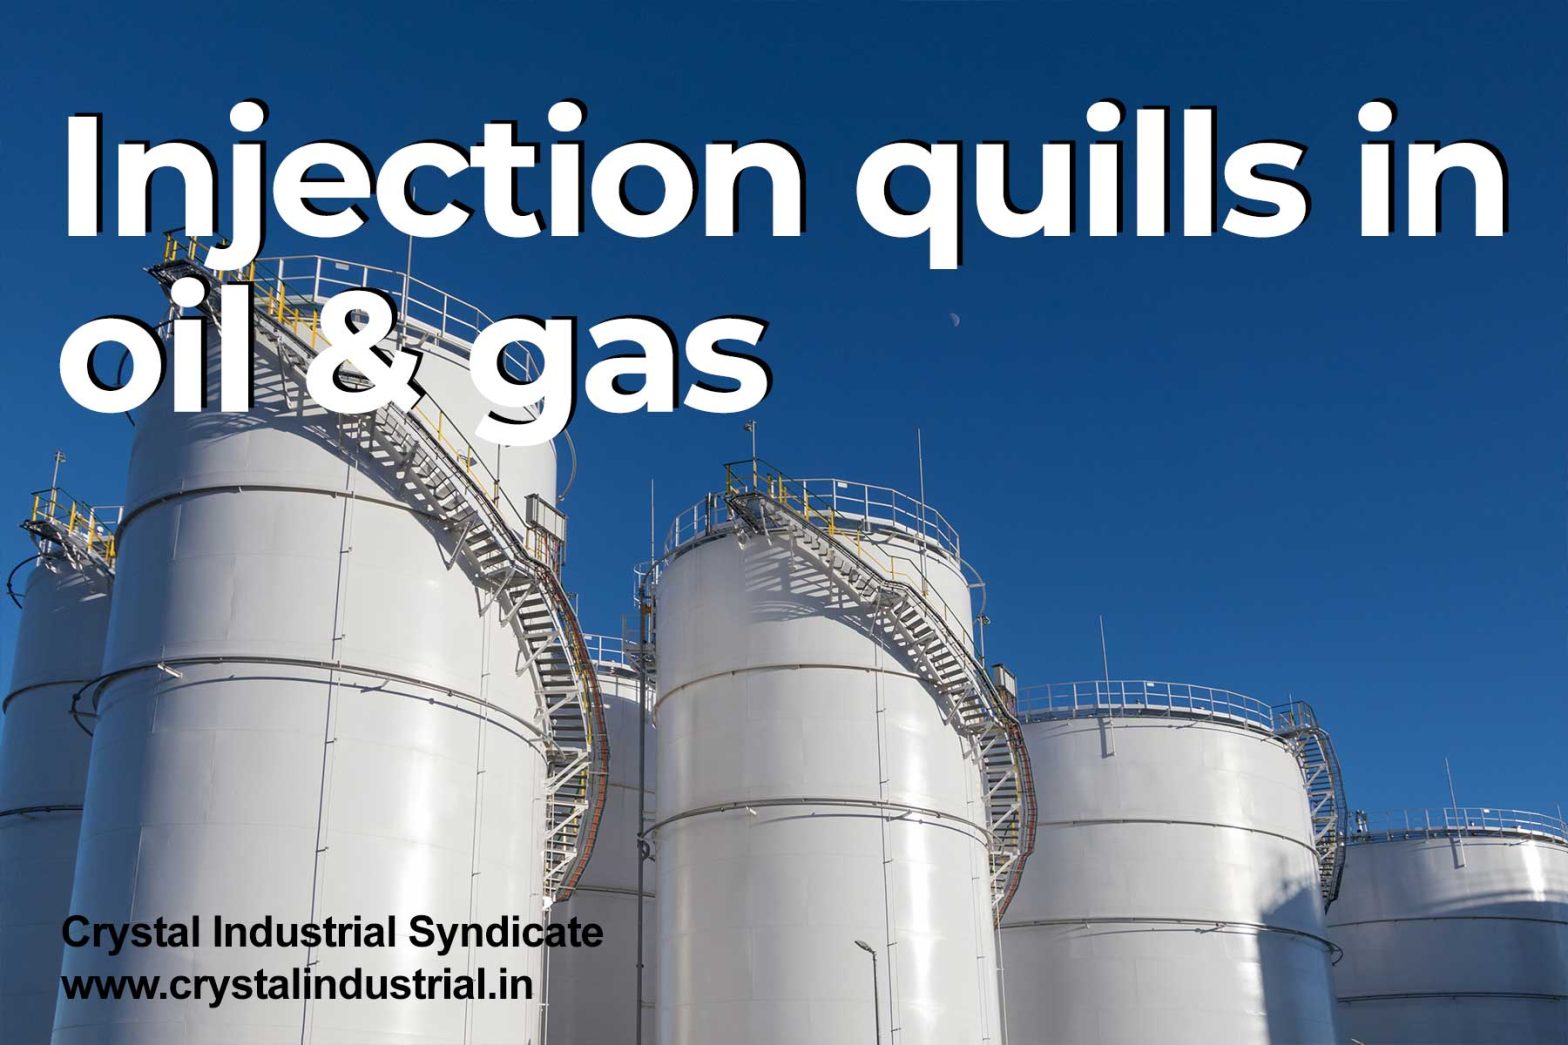 Injection quills for the oil & gas industry